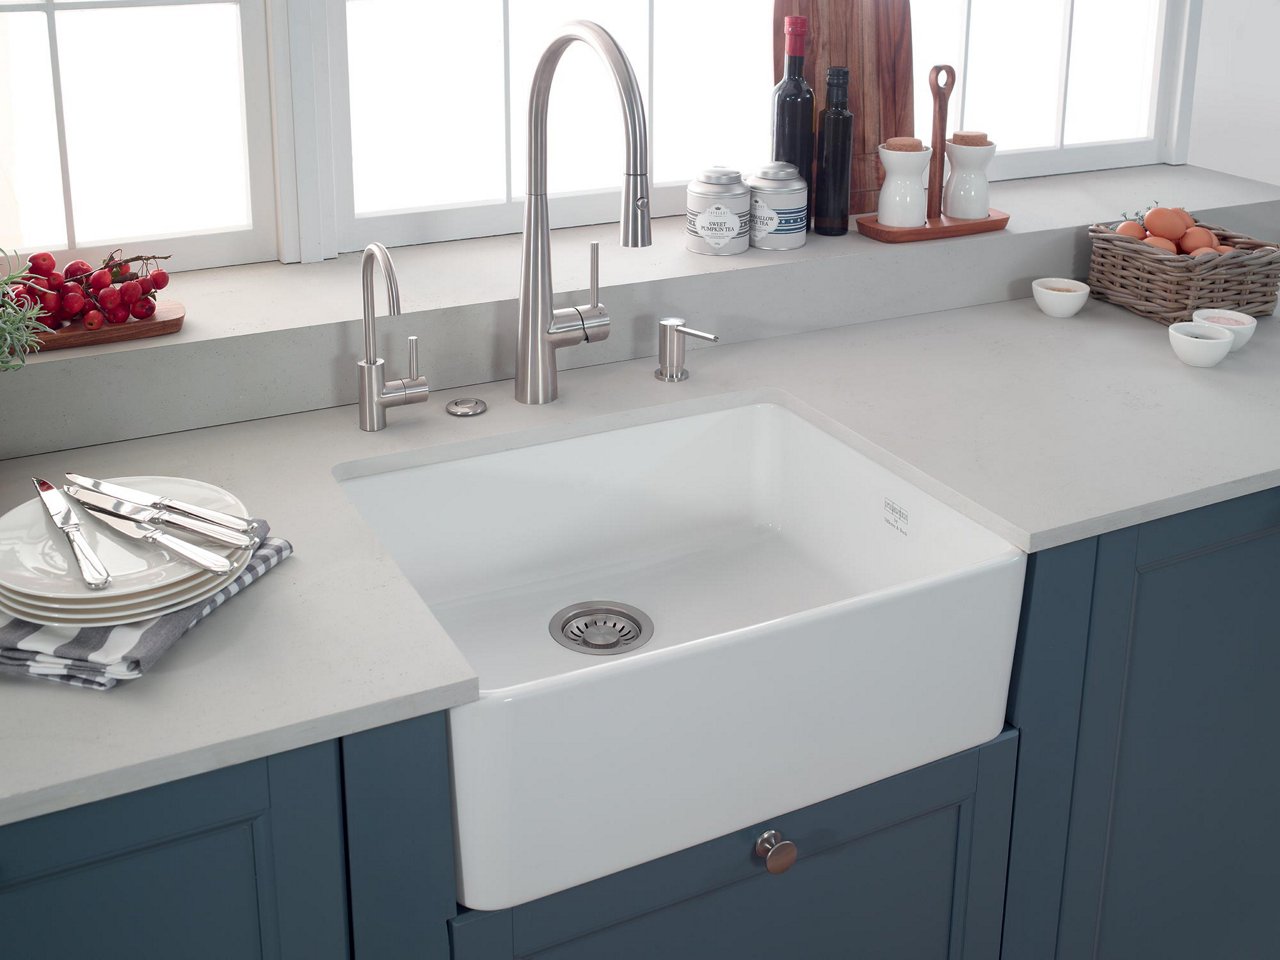 farmhouse kitchen with white apron front sink and chrome faucets